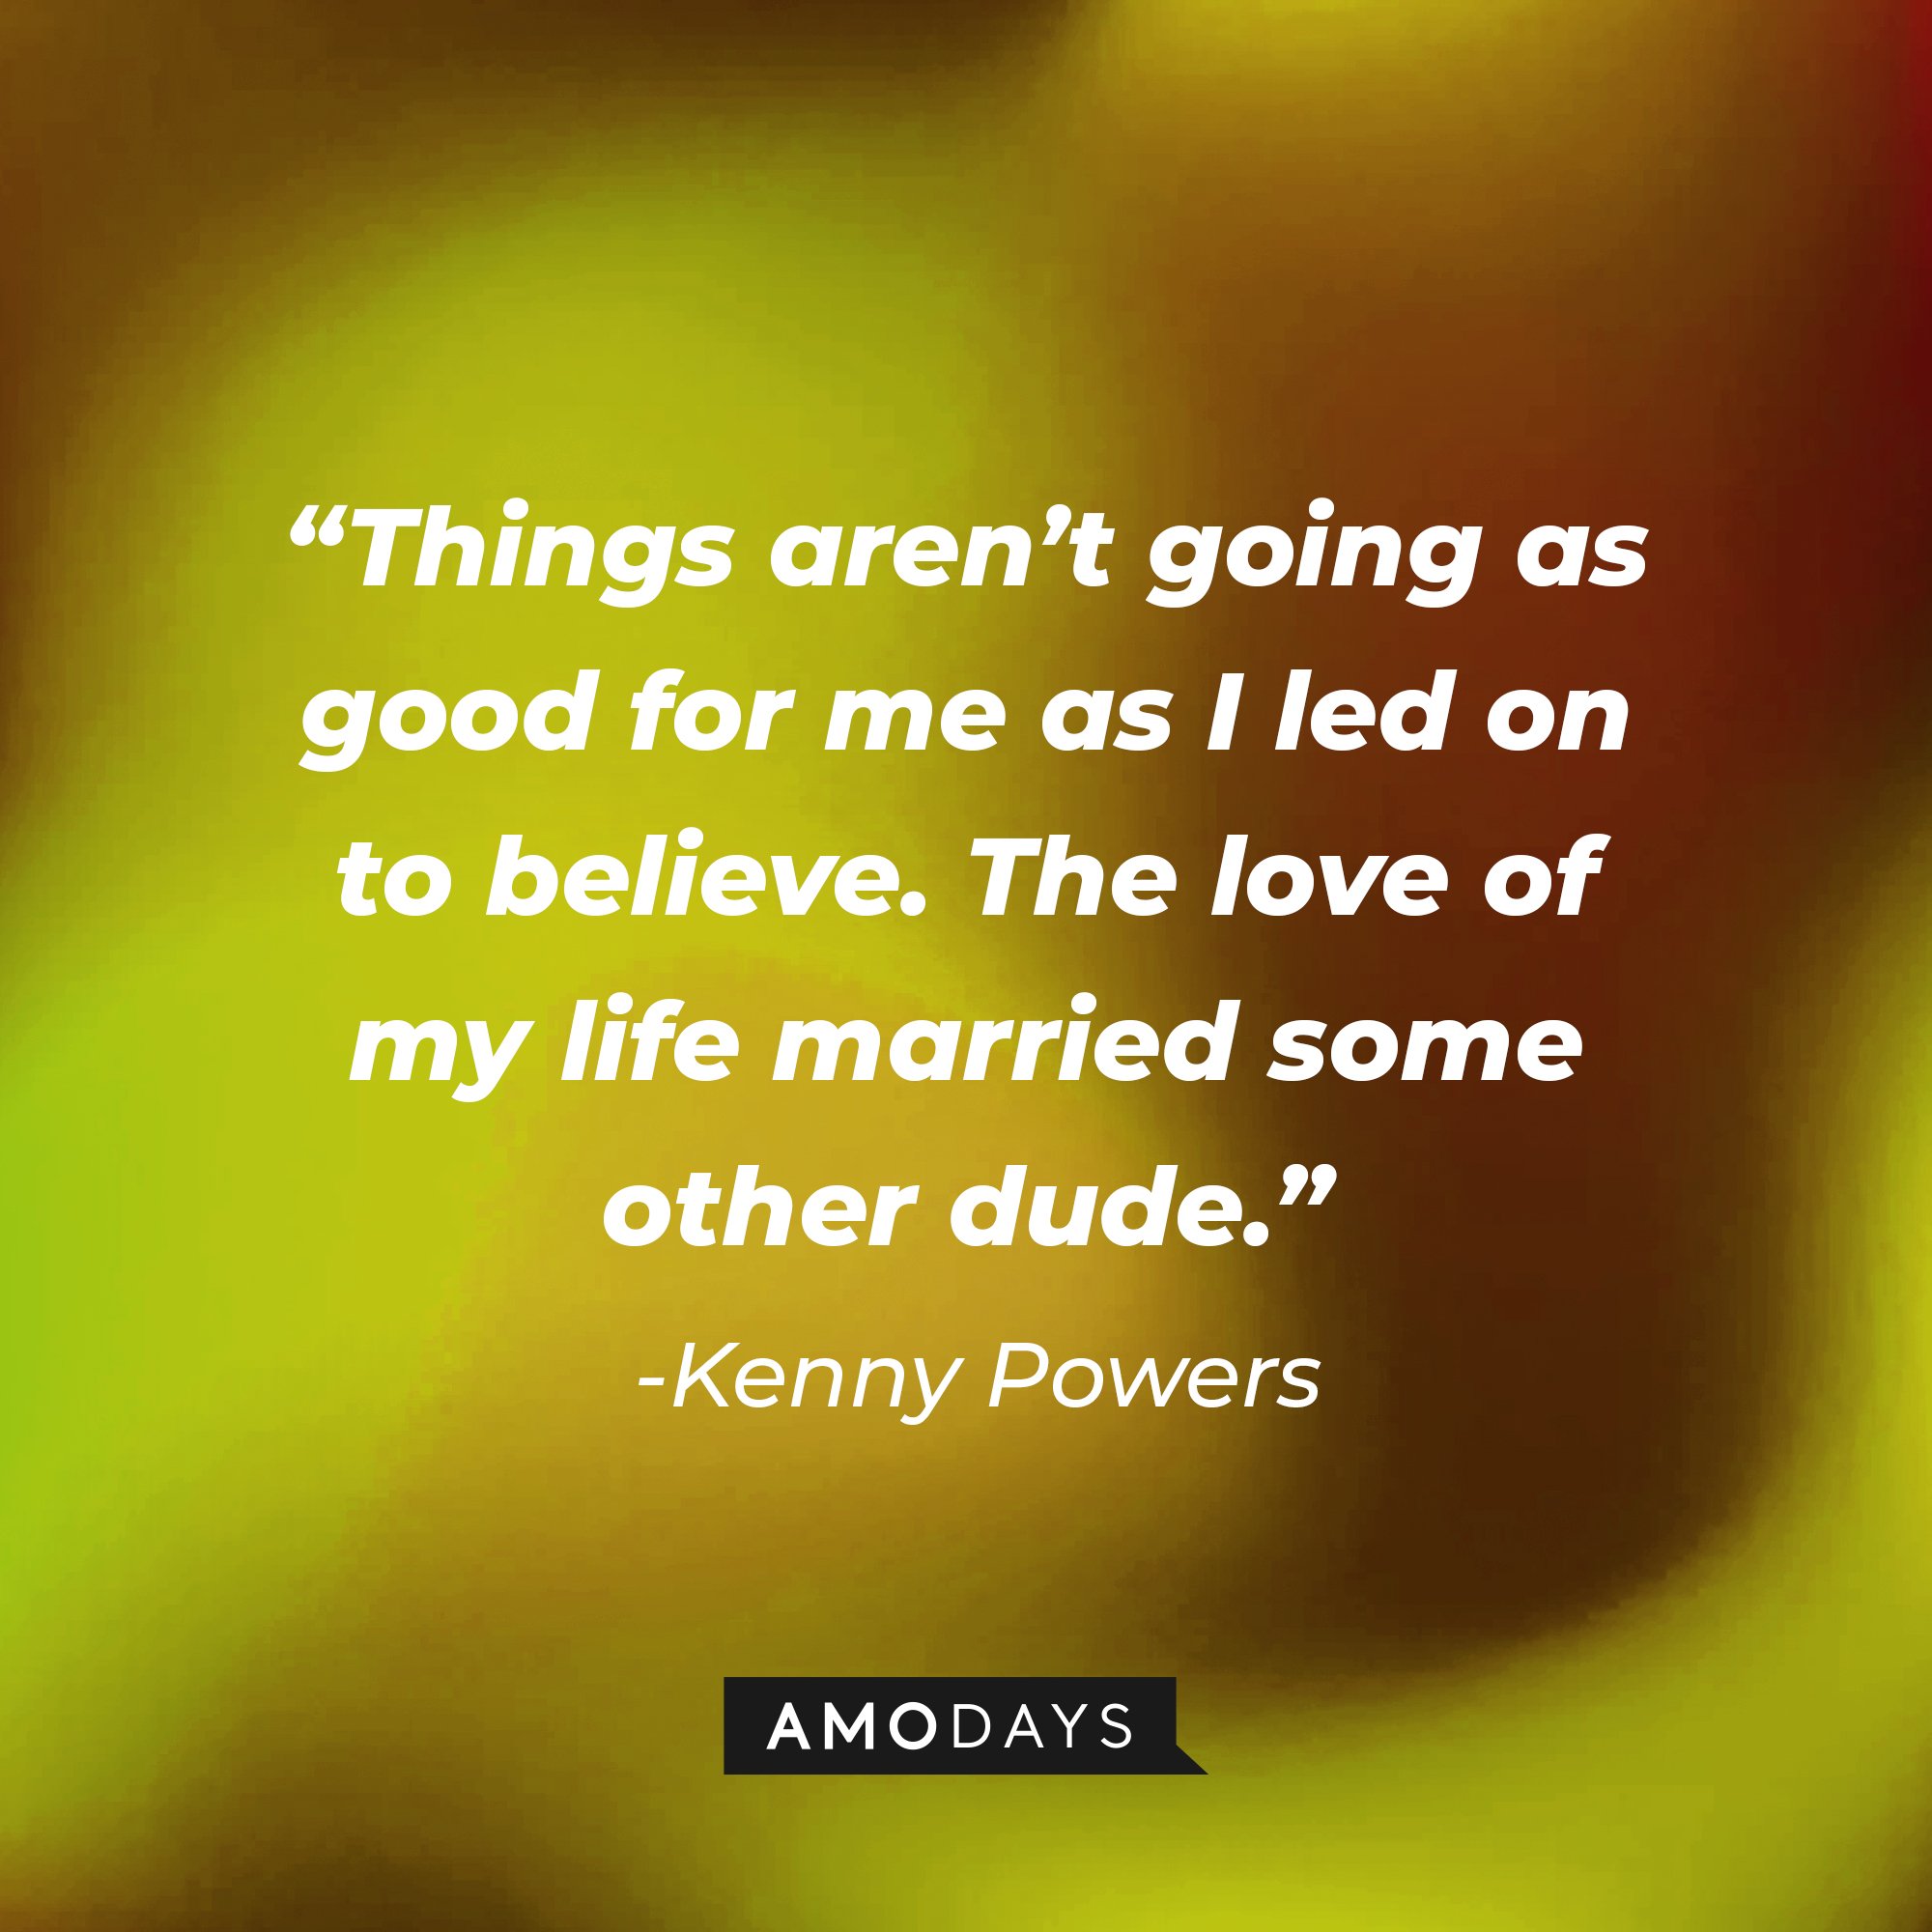  Kenny Powers' quote: Things aren't going as good for me as I led on to believe. The love of my life married some other dude.” | Image: AmoDays